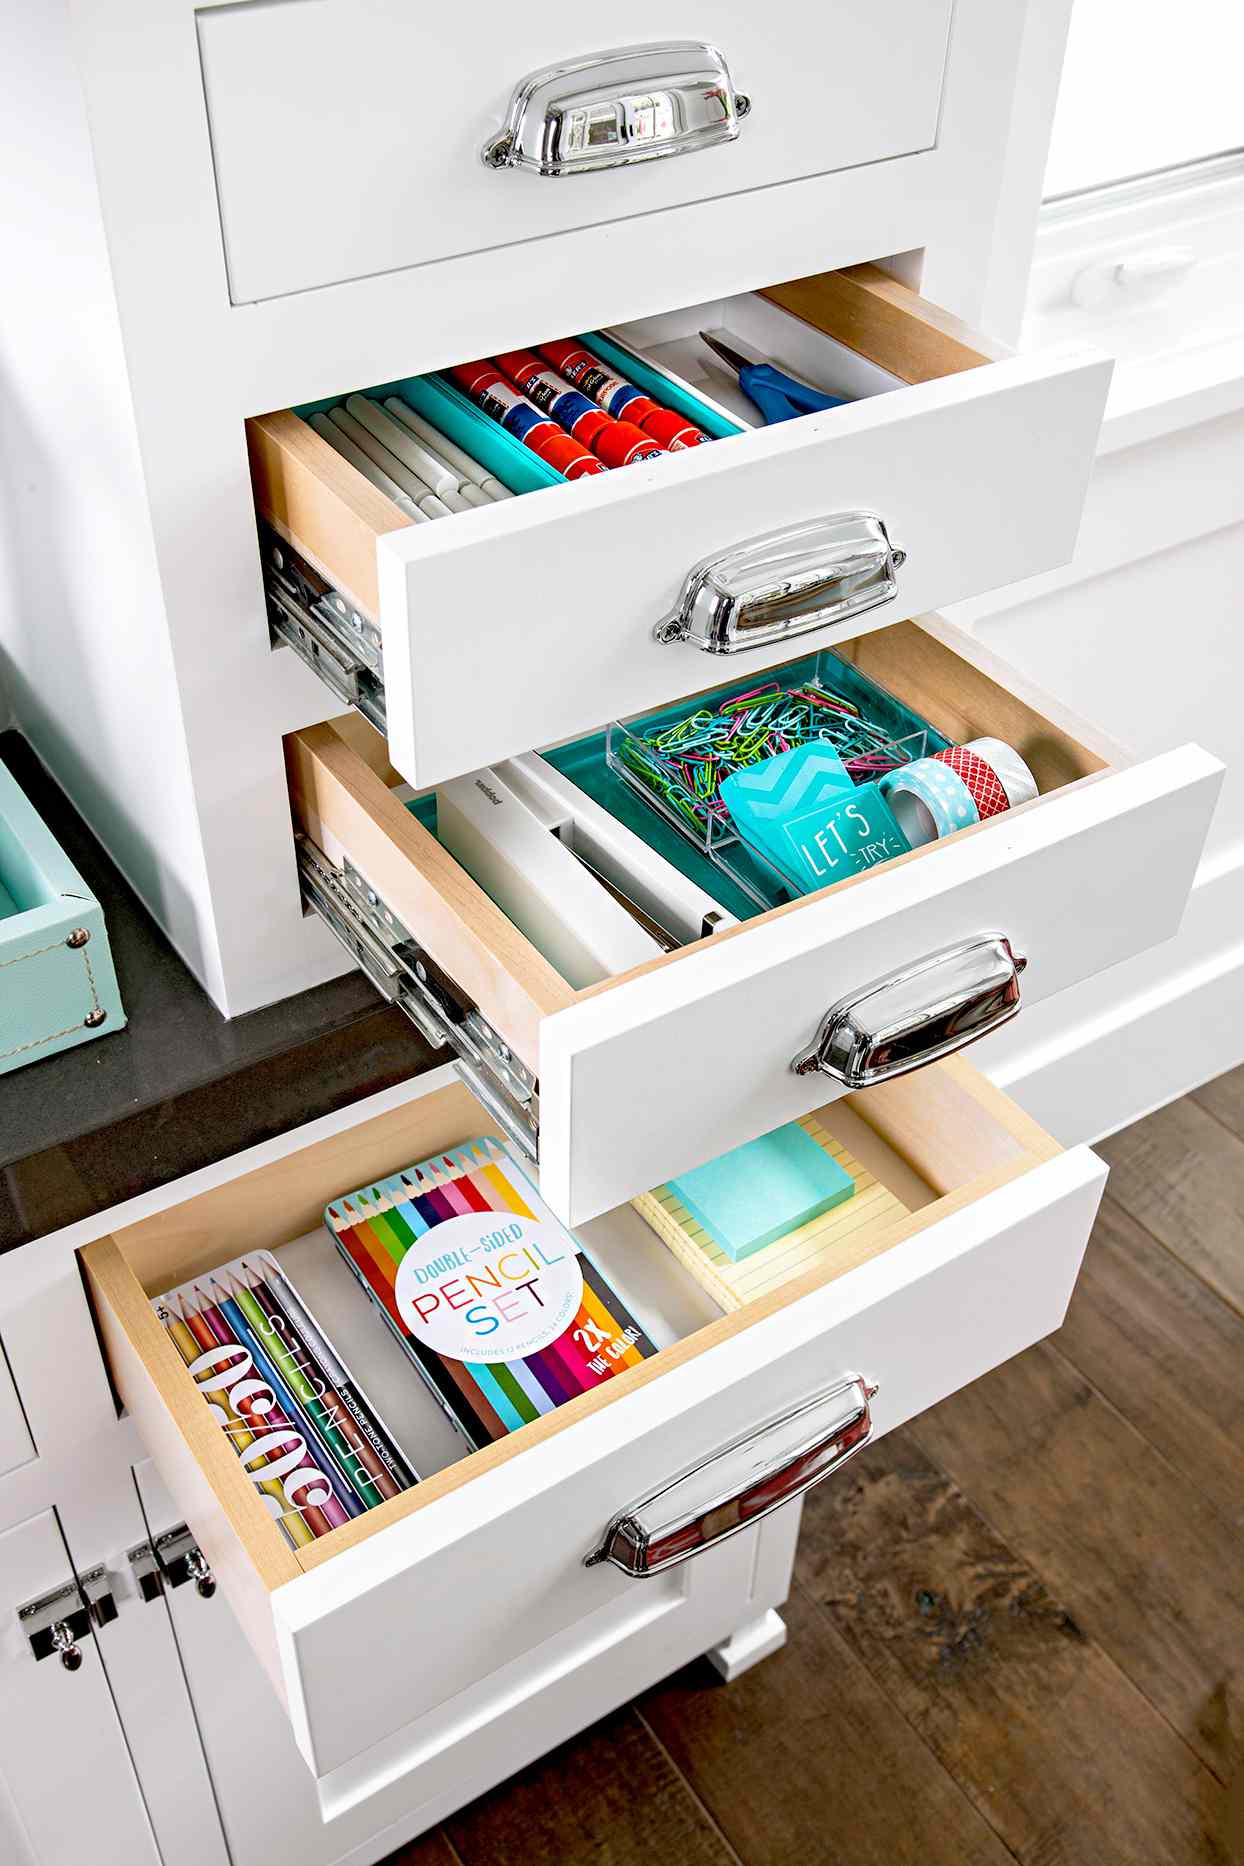 Open drawers with organized supplies